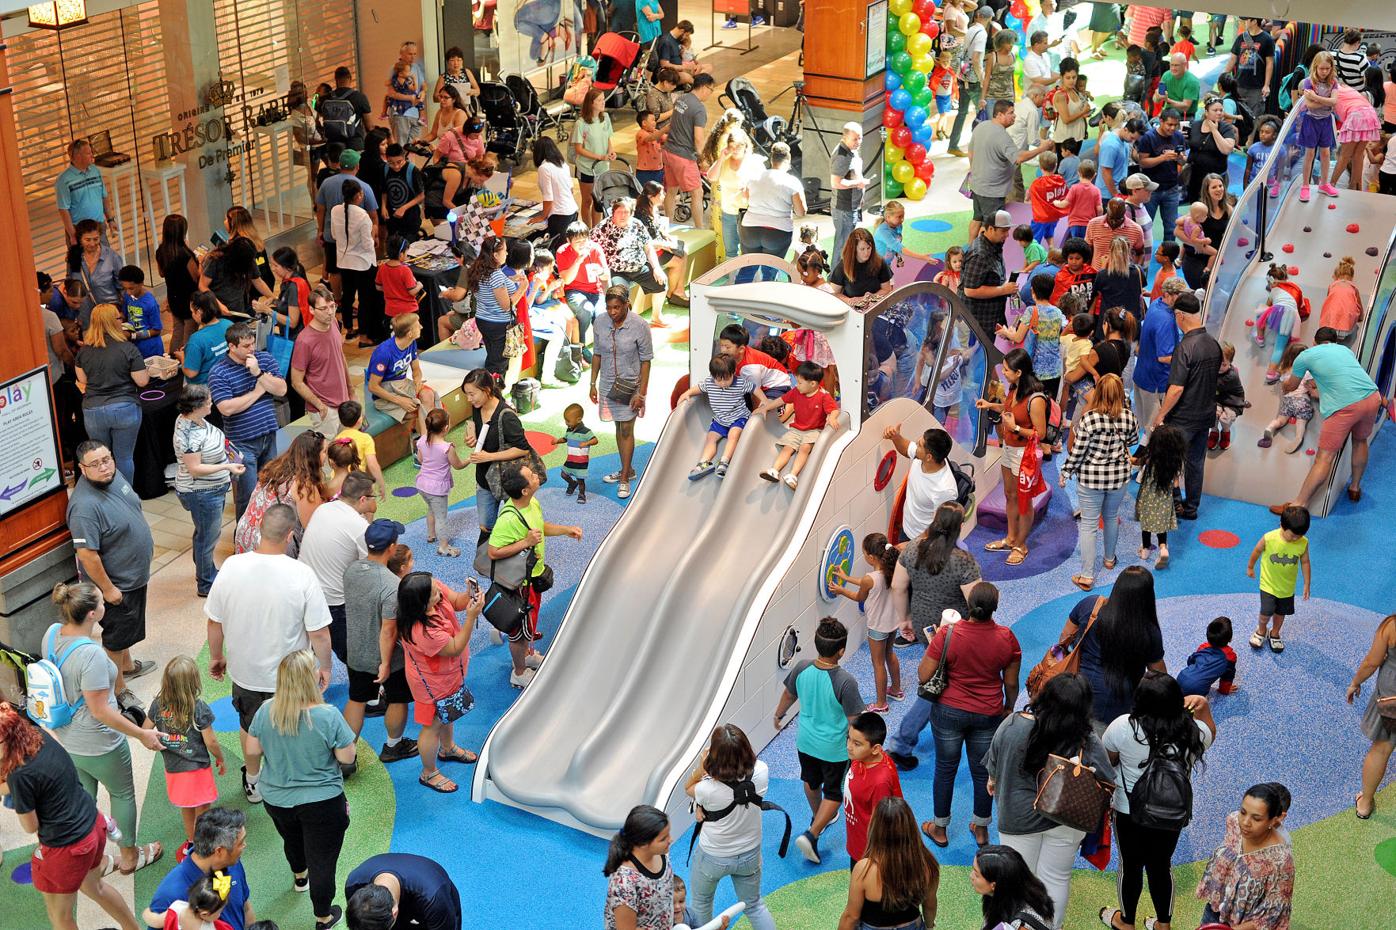 Mall of Georgia on X: Mall of Georgia's Play Area is getting a  makeoverand major expansion! Enjoy a reimagined, interactive play  experience opening this summer in Von Maur Court. Details:    /